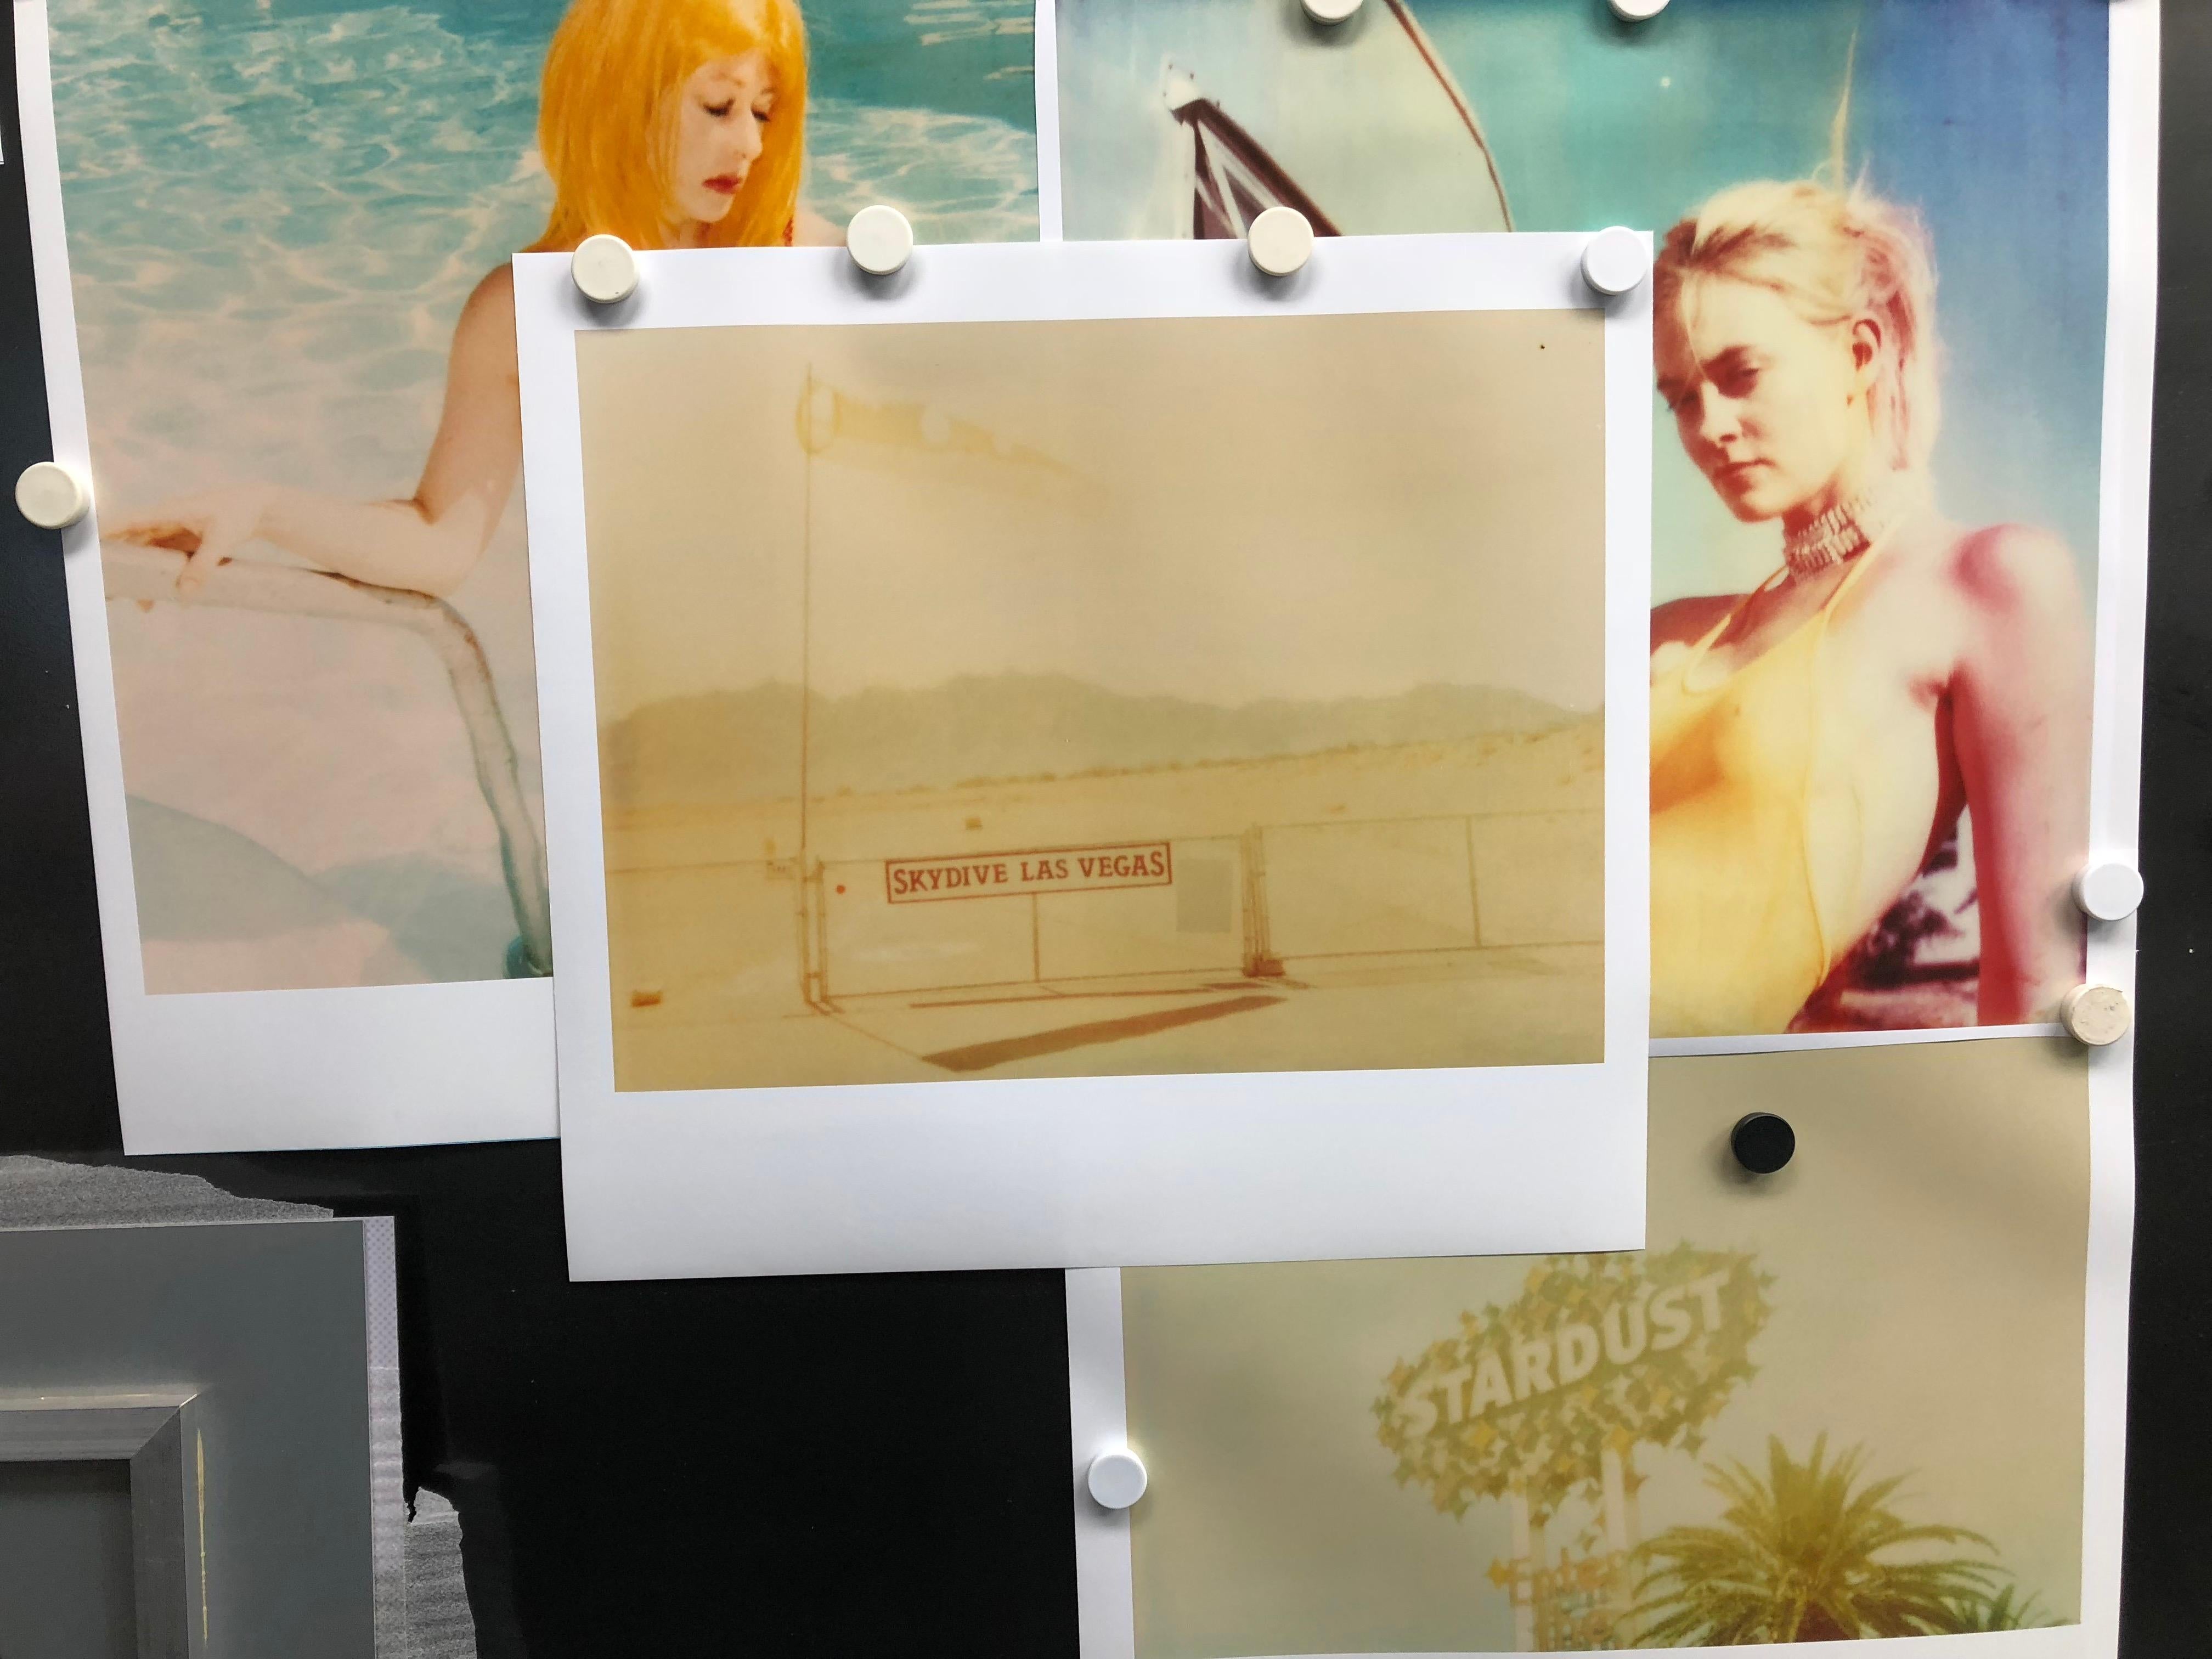 'Skydive' (Las Vegas), 1999, 50x60cm,
Edition 6/10, analog C-Print, hand-printed and enlarged by the artist, based on her expired Polaroid photographs
Certificate and Signature label, artist Inventory Nr. 541.06, unmounted

THE GREATER THE EMPTINESS